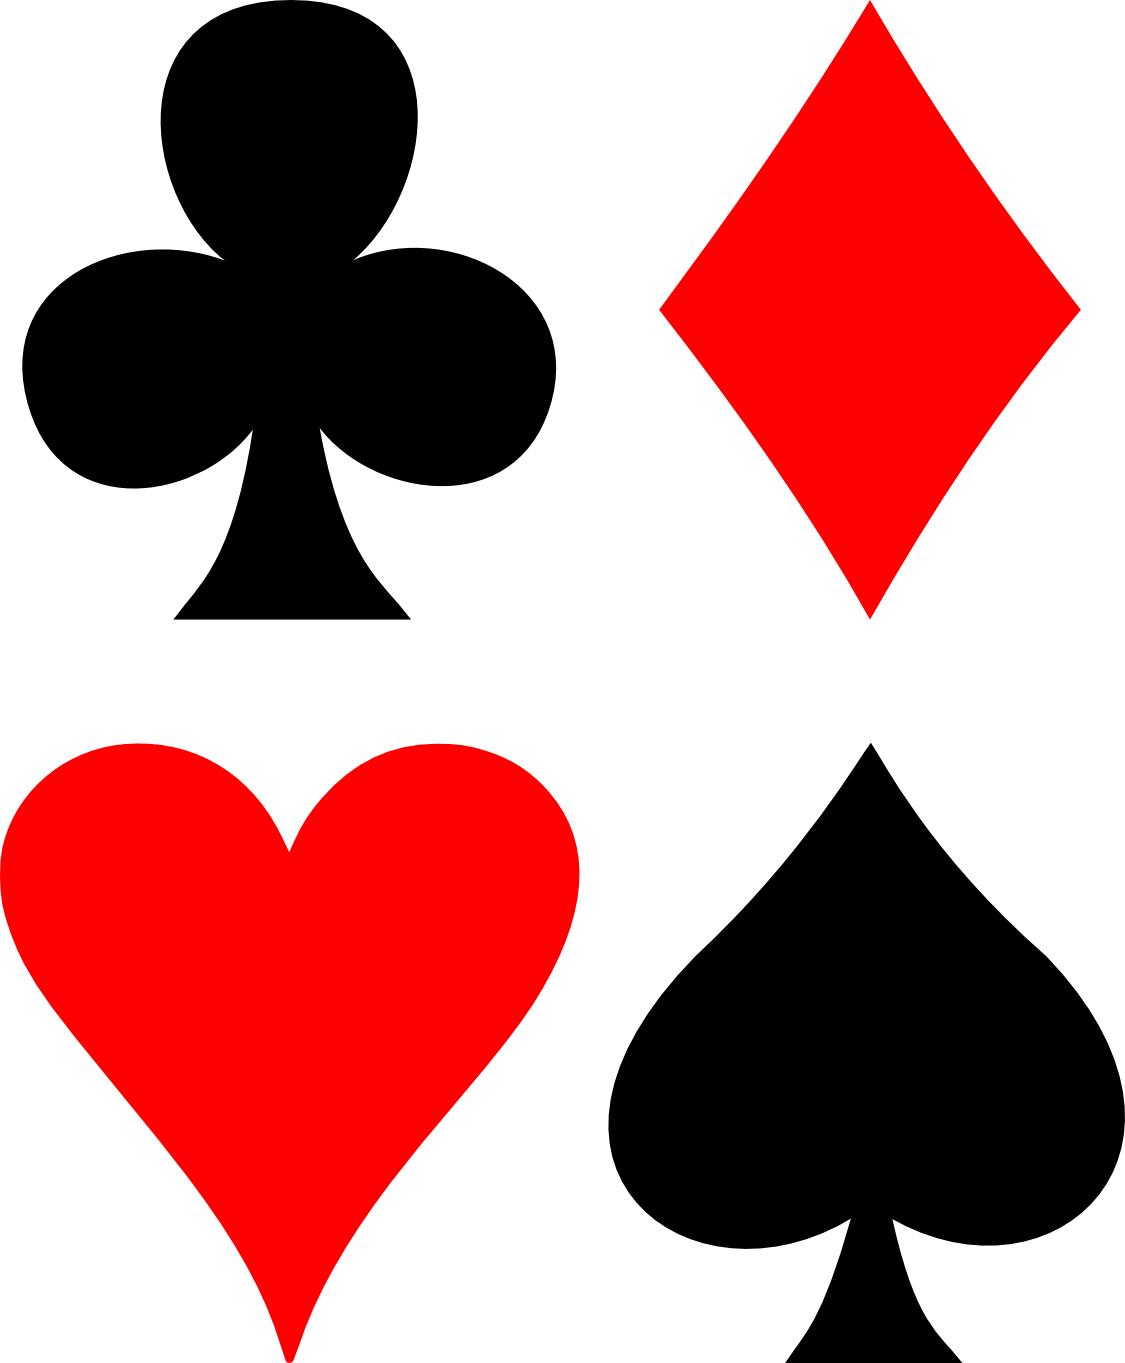 Playing Card Suit Symbols PNG PNG Mart